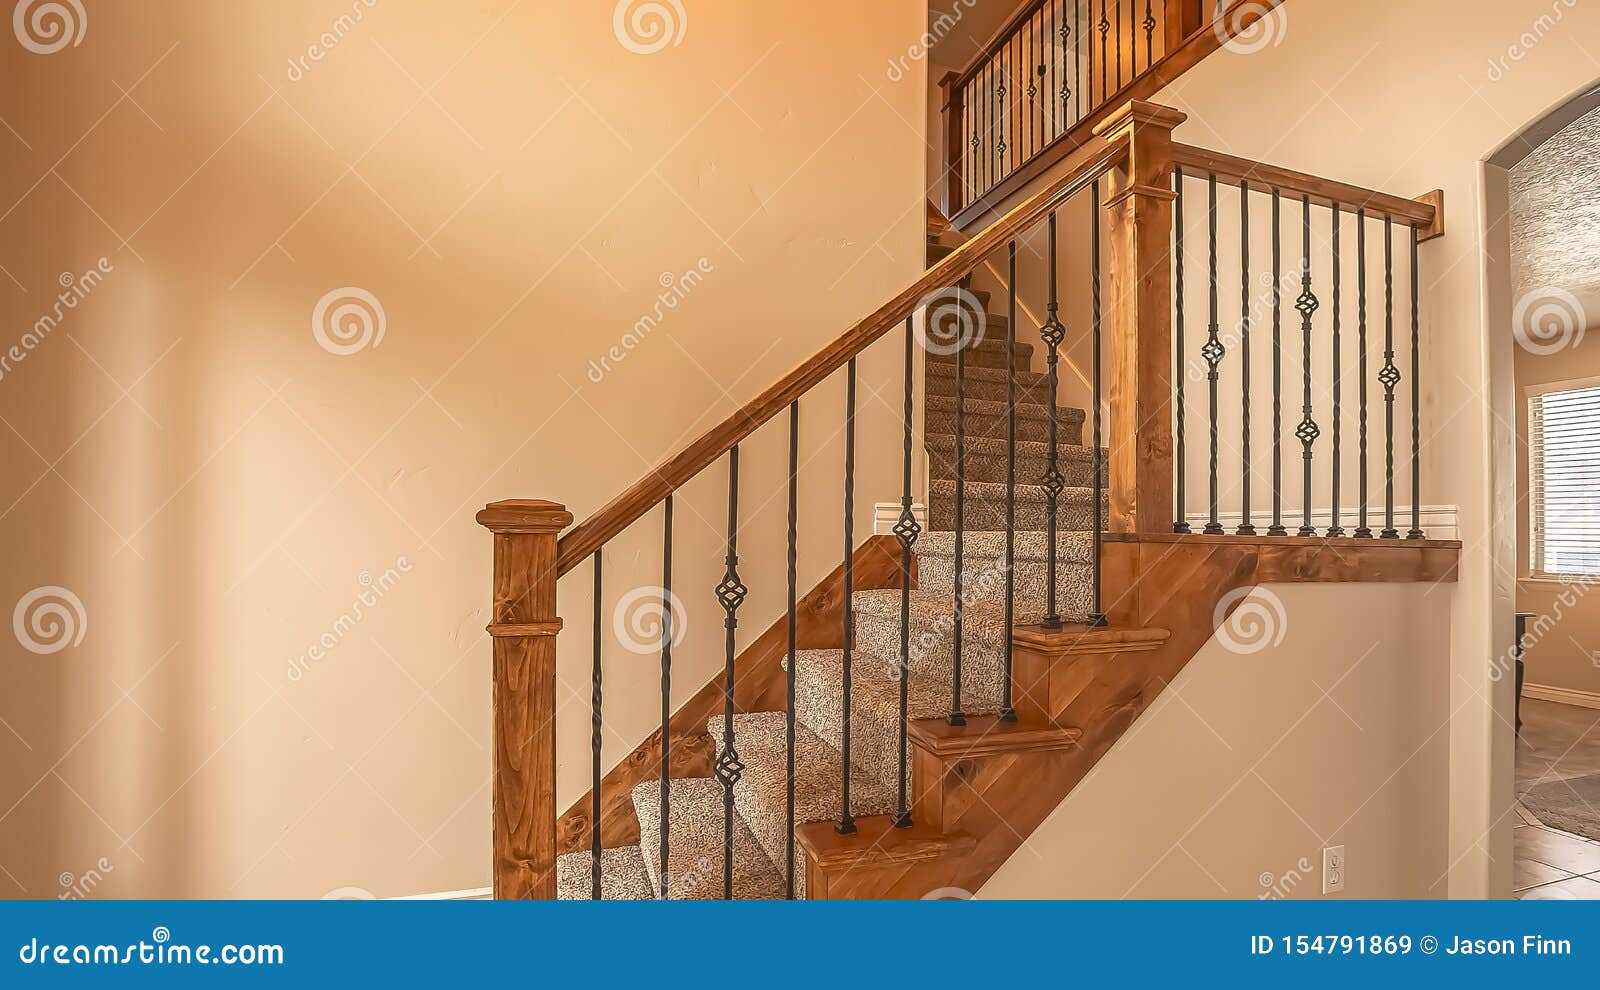 Stairs Handrail For Stairs Indoor Outdoor Steps Non-Slip Wood Stair Handrail Corridors Suitable For Loft Size:1ft / 30cm GJIF Wooden Handrail